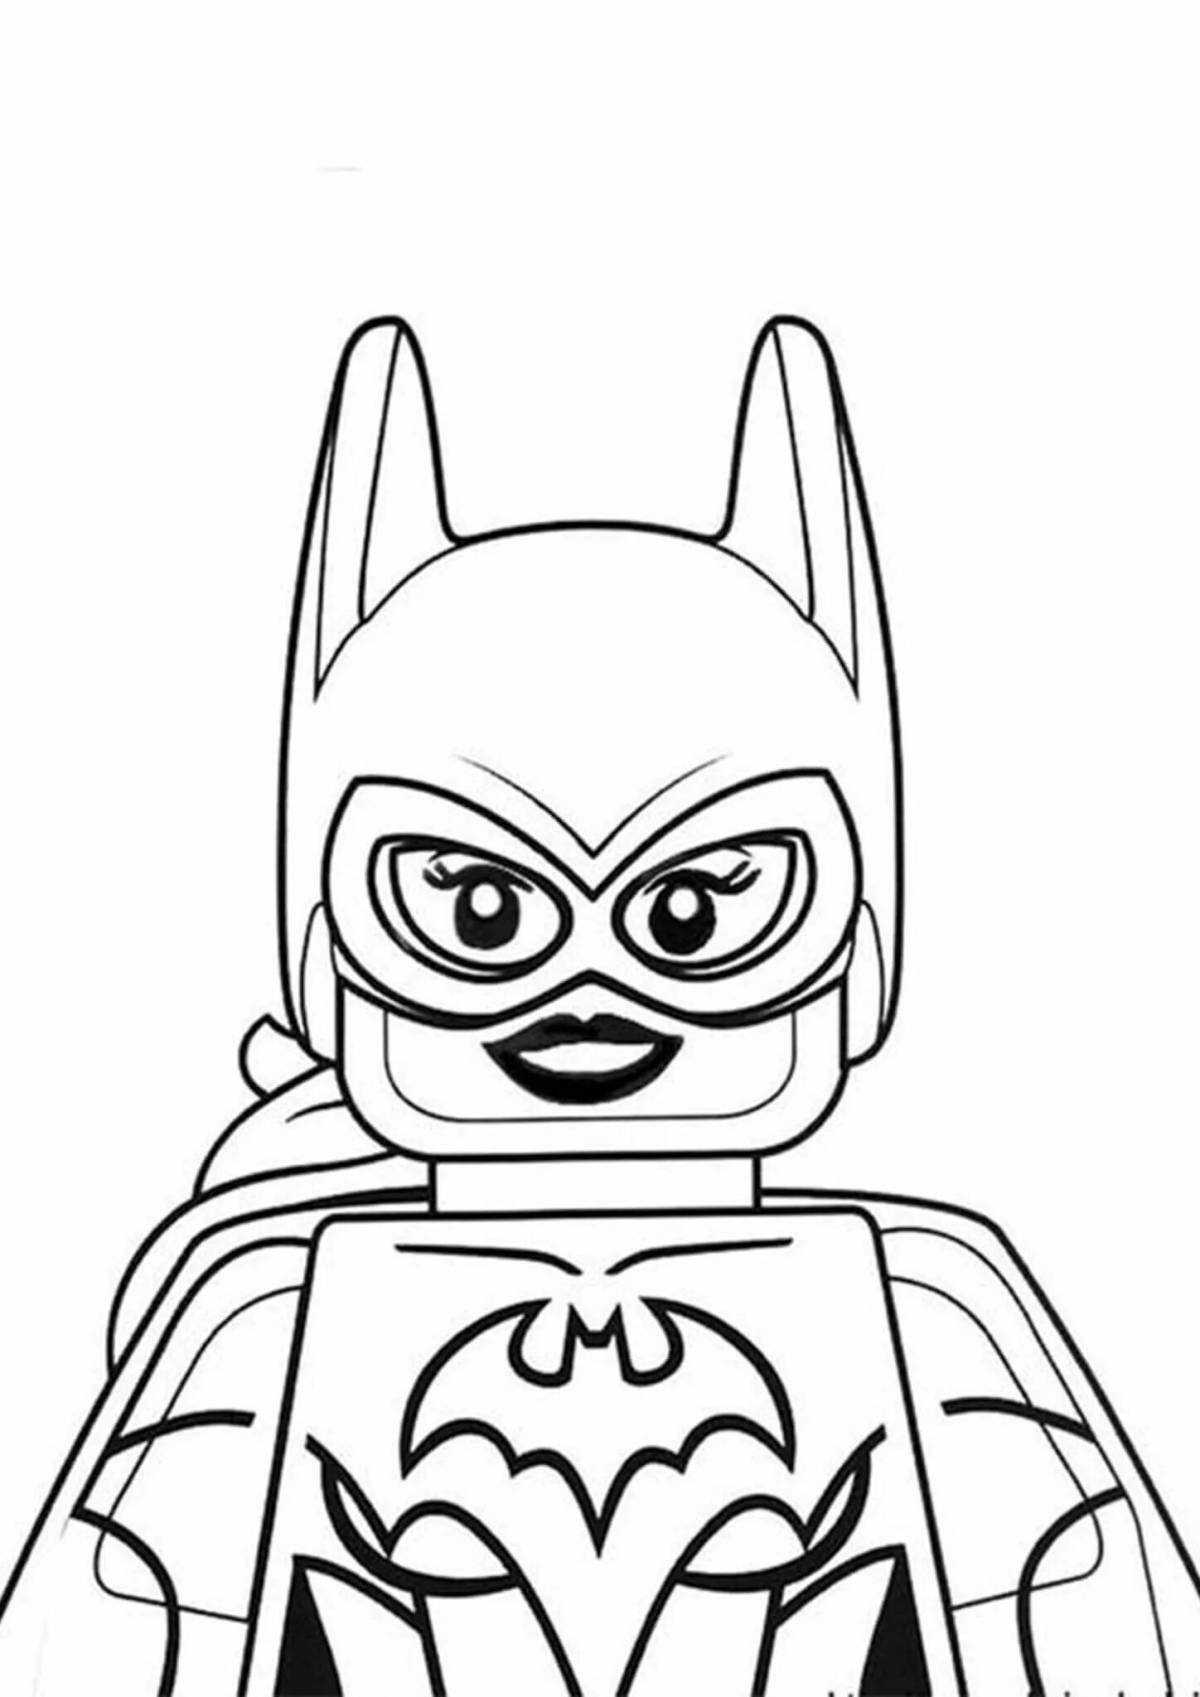 Lego flash dynamic coloring page